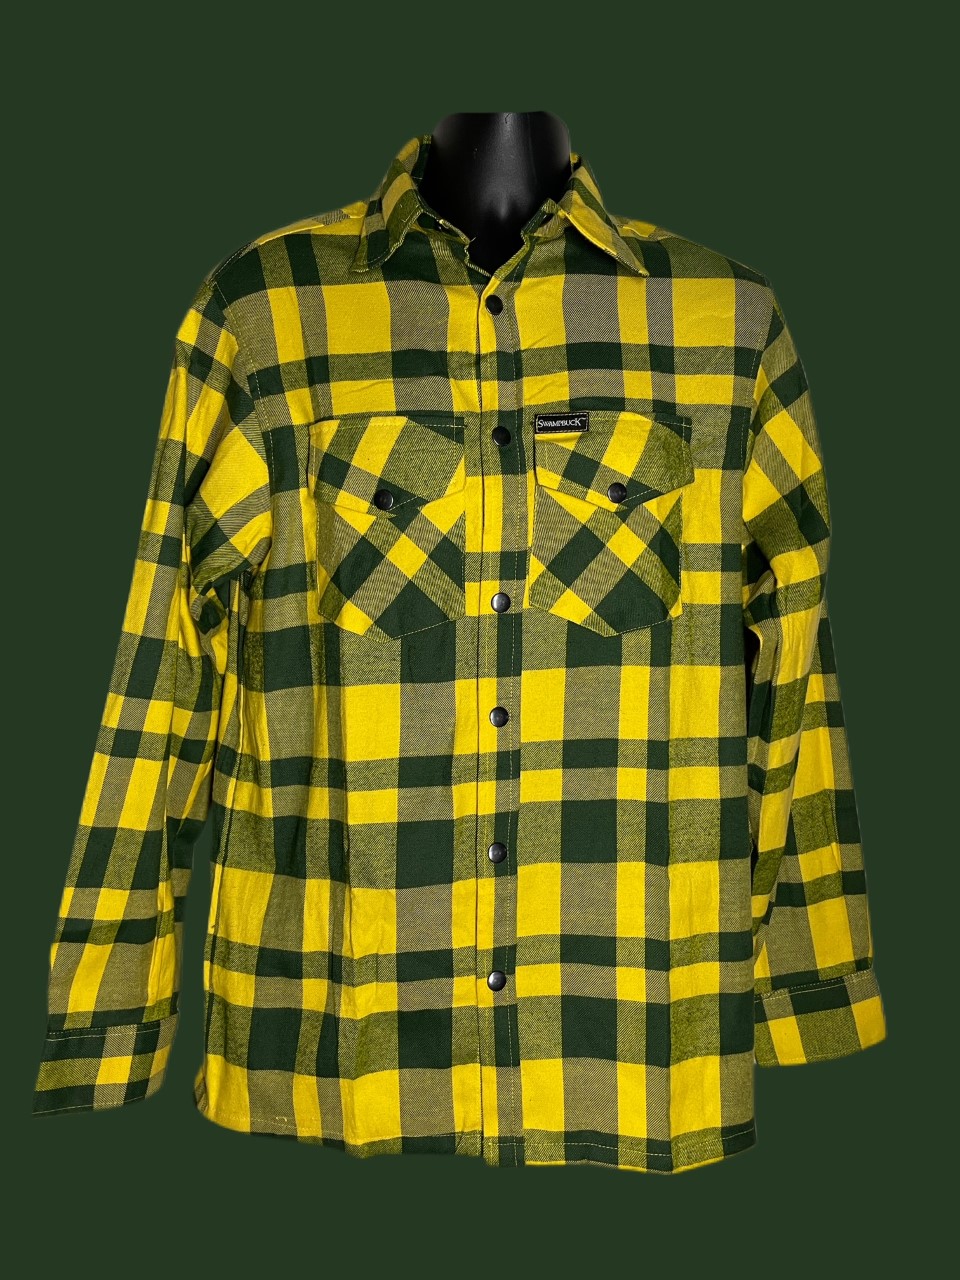 Green and Gold Flannel shirt!